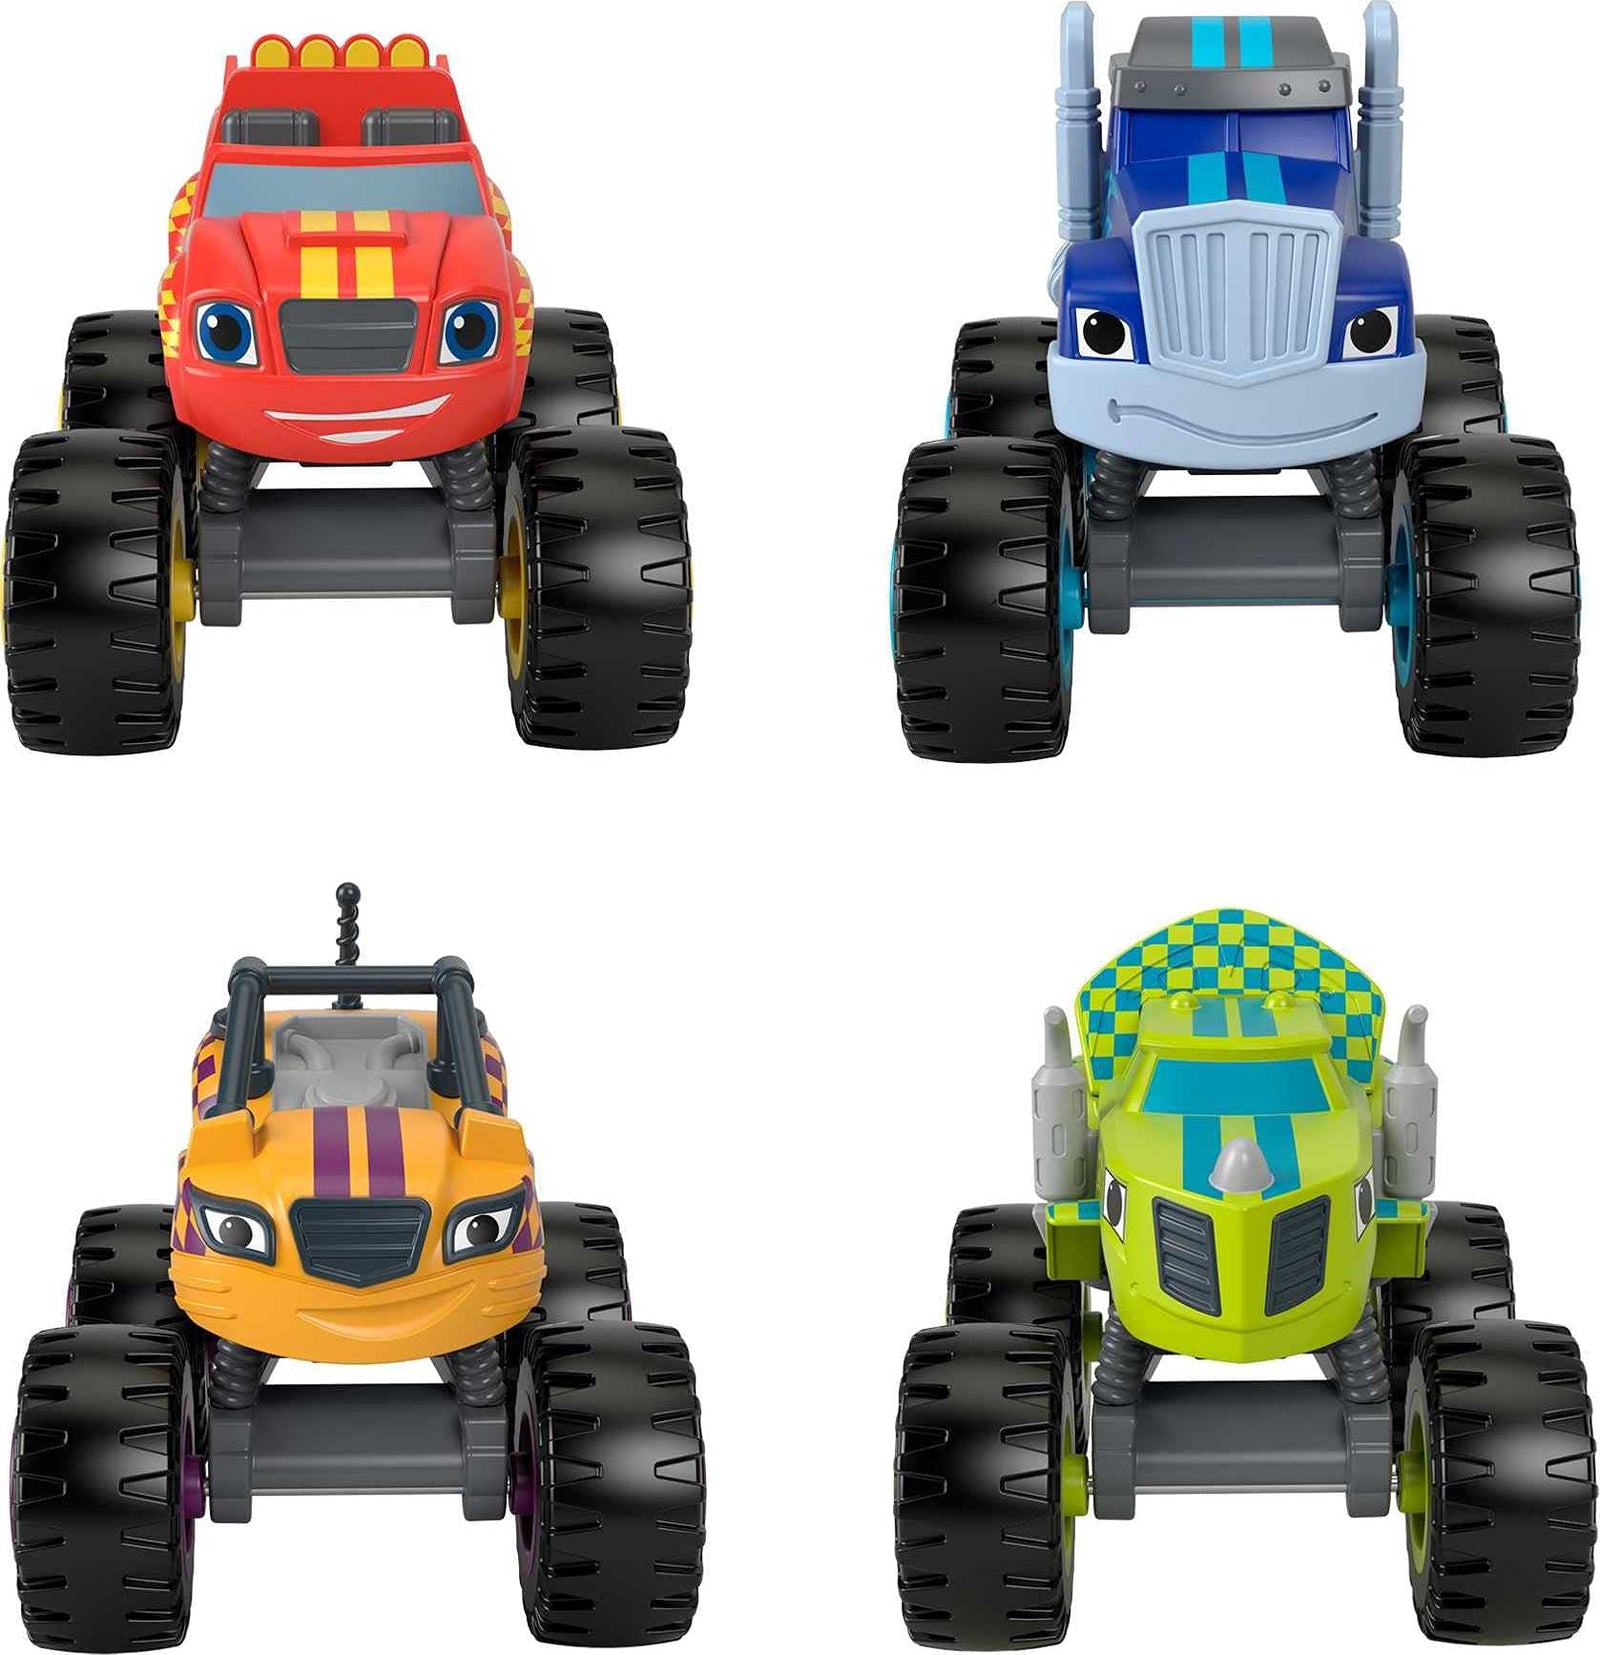 Fisher-Price Blaze and The Monster Machines Racers 4 Pack, Set of Die-Cast Metal Push-Along Vehicles for Preschool Kids Ages 3 Years and Older